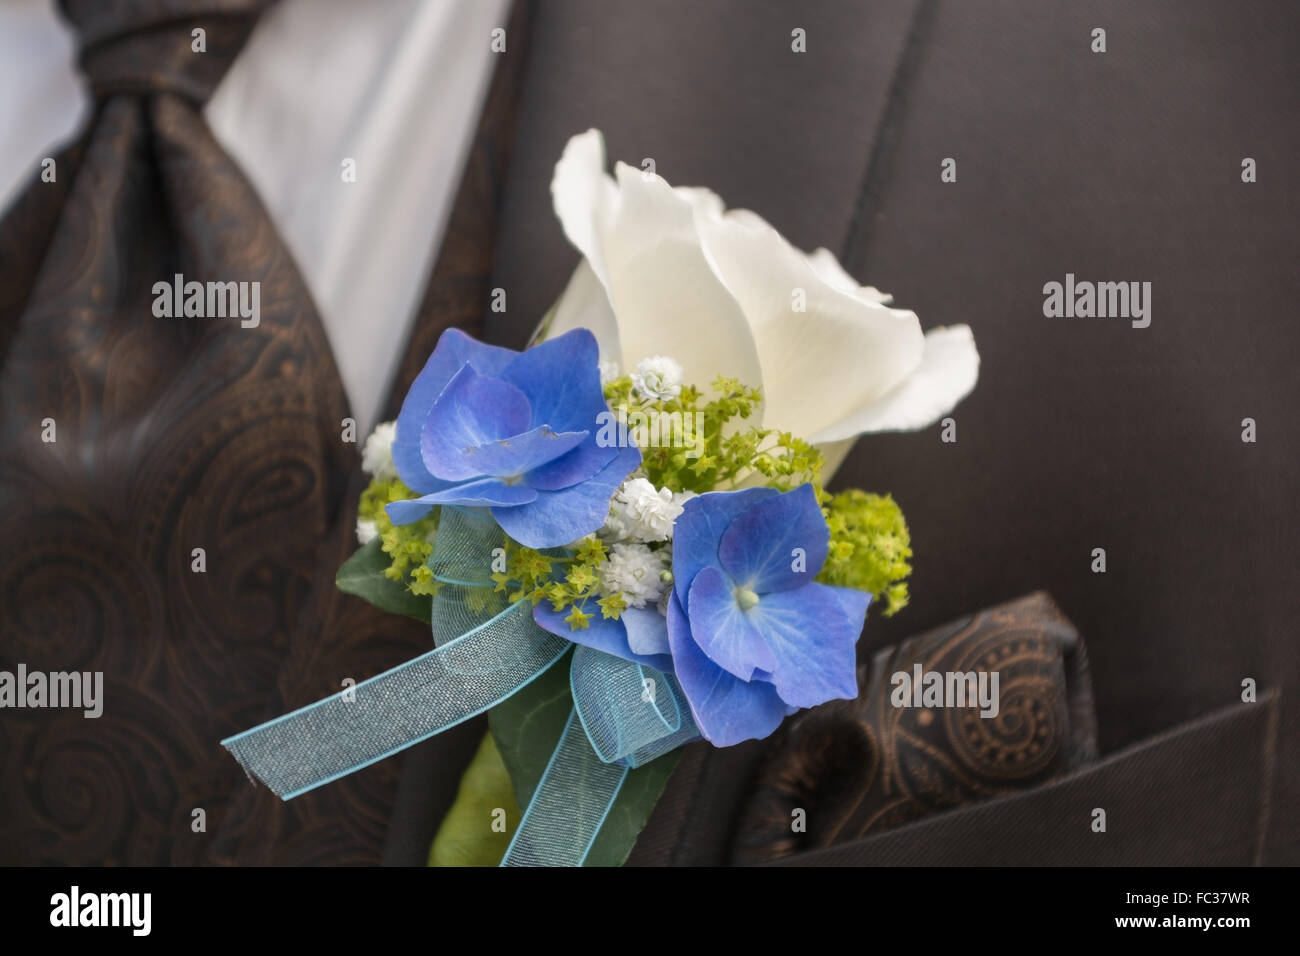 Corsage and tie the groom Stock Photo